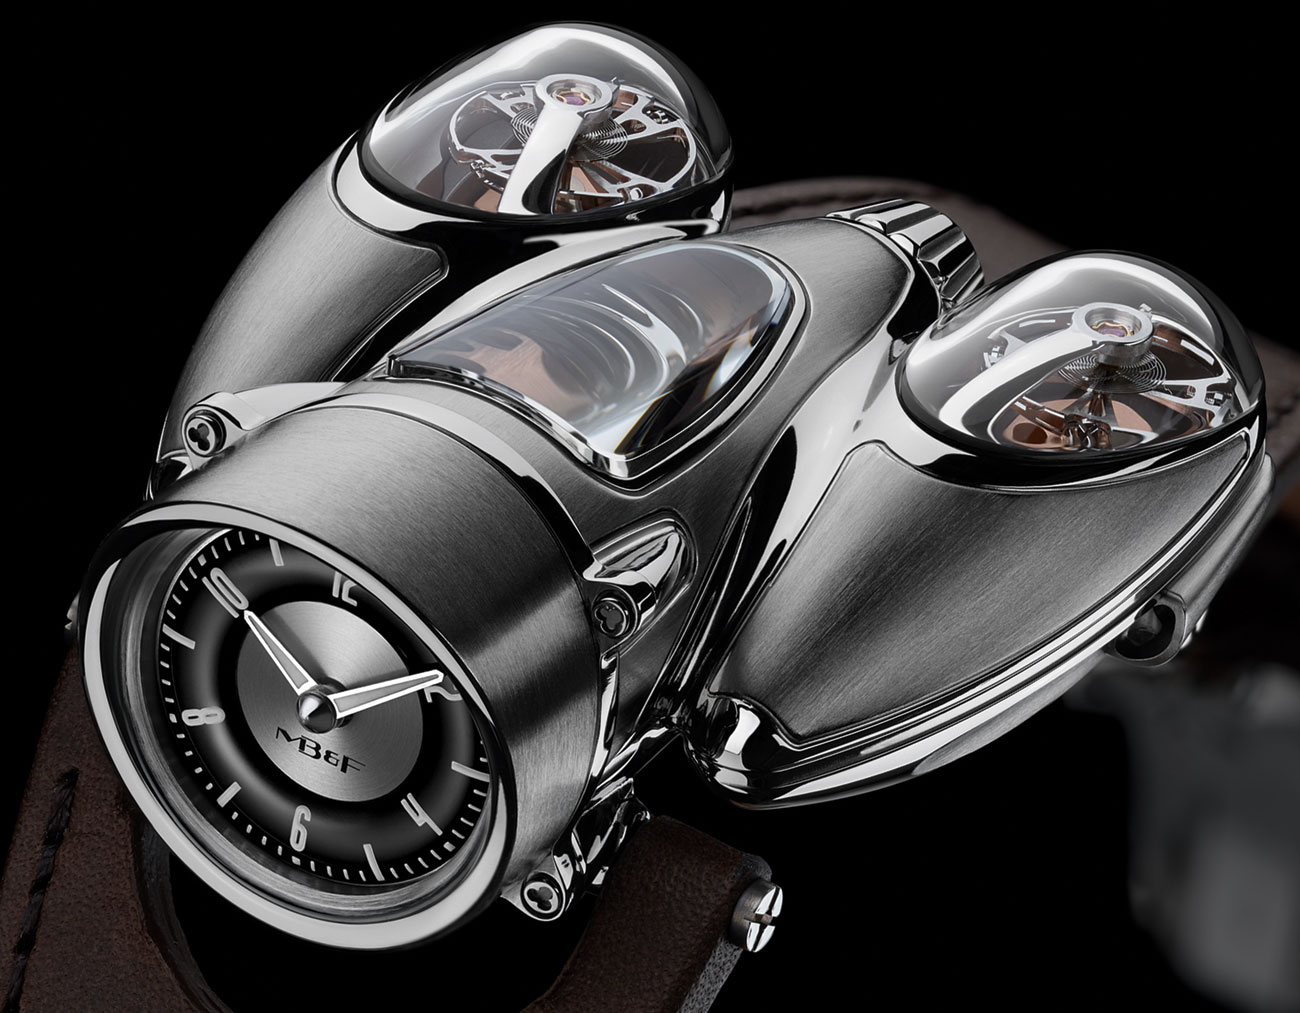 MB&F's new Horological Machine No. 9 Flow watches MBF-Horological-Machine-No-9-HM9-Flow-Air-Road-aBlogtoWatch-6